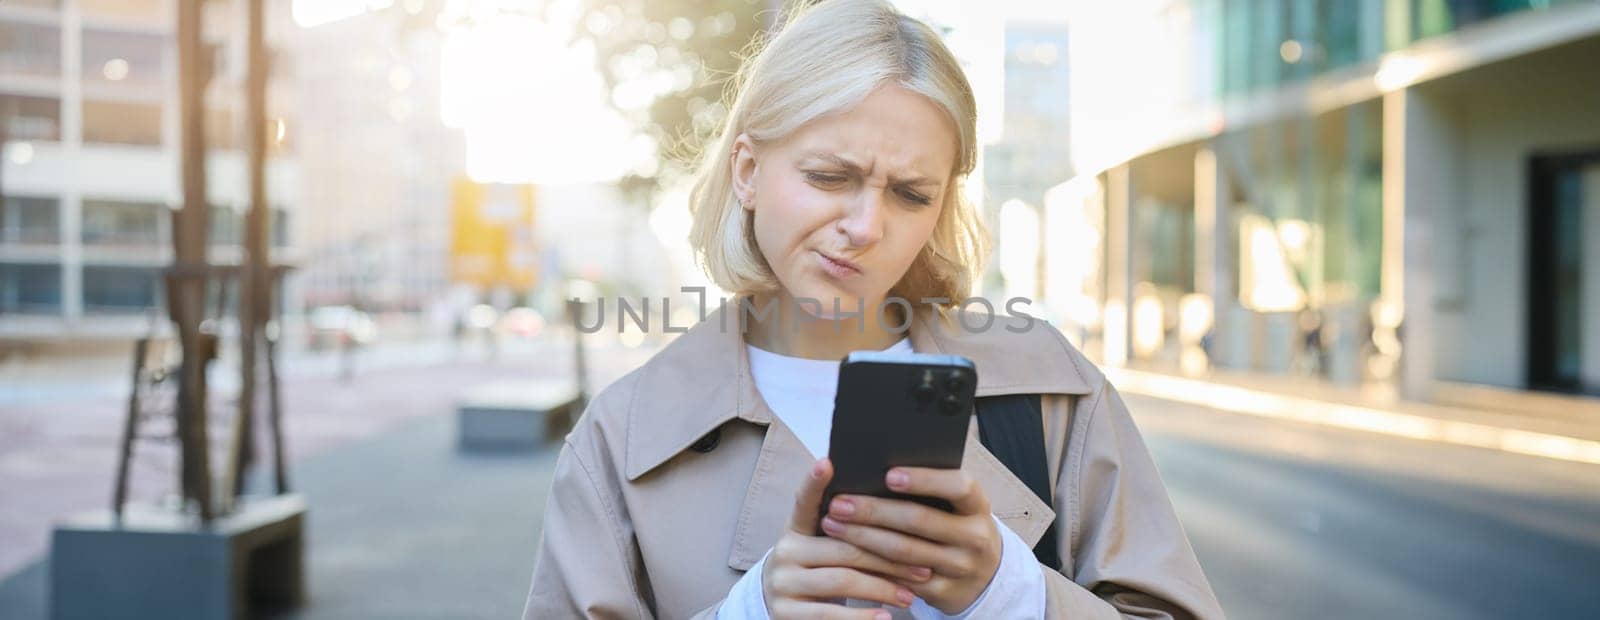 Close up portrait of woman looking sceptical at her mobile phone, standing on street, frowning and standing perplexed, reading something on smartphone screen.